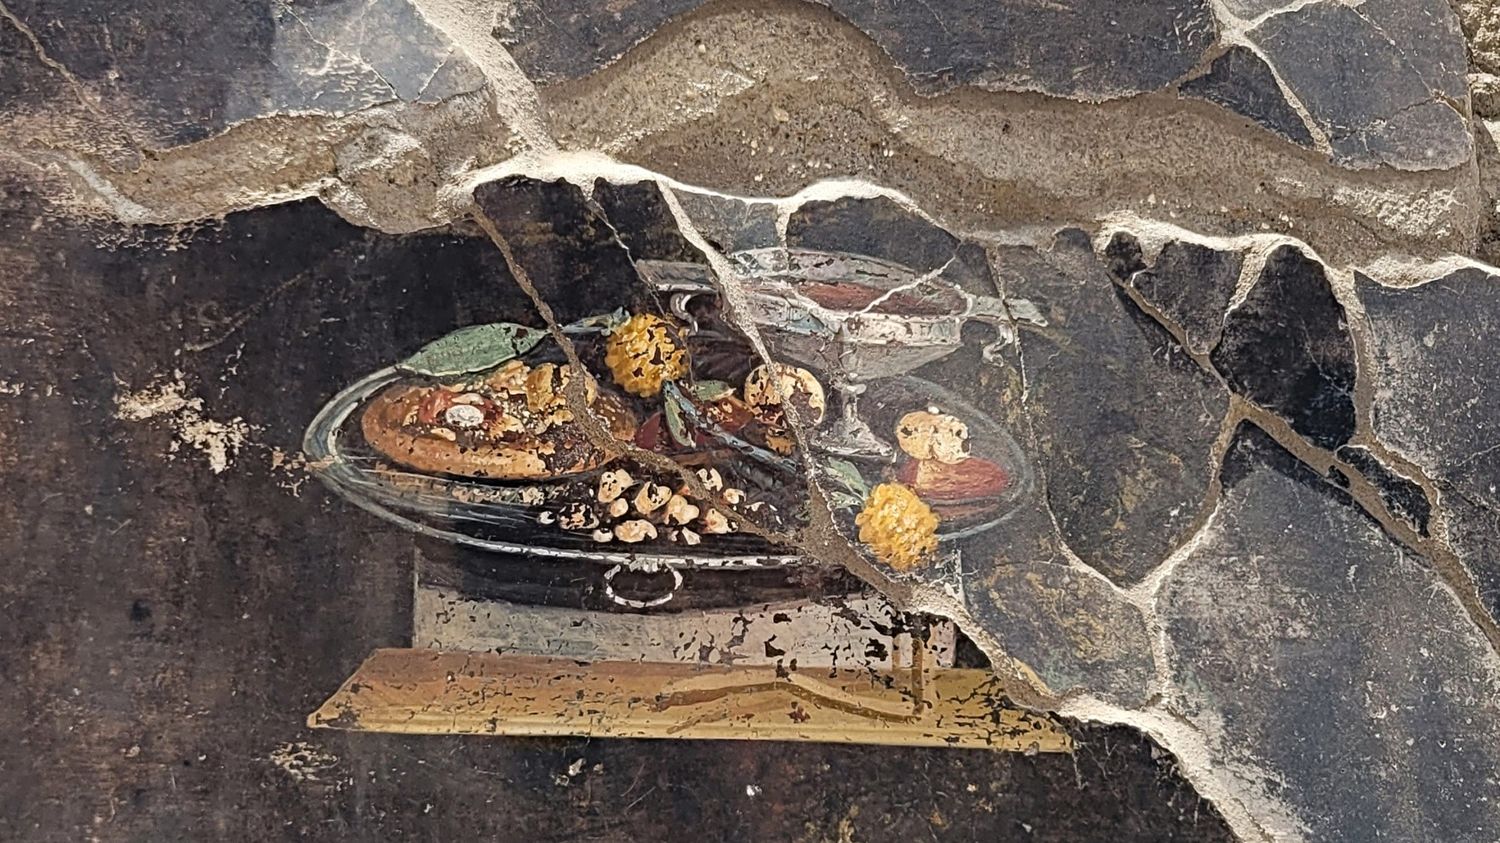 an image of "pizza" discovered on a fresco in the ruins of a Roman city